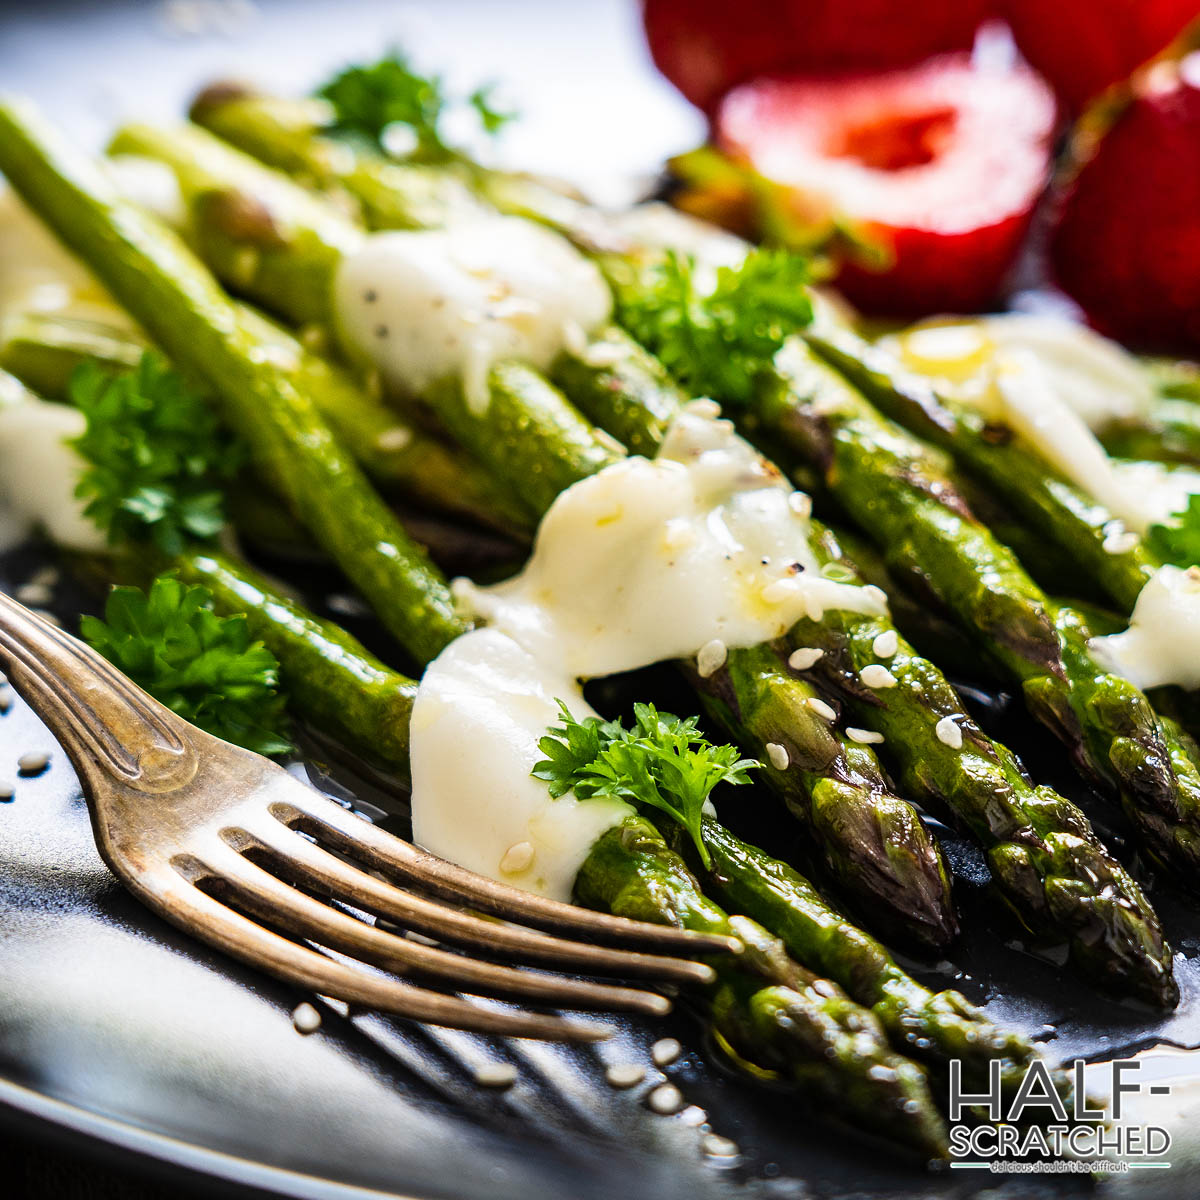 Oven baked asparagus with mozzarella at 375F